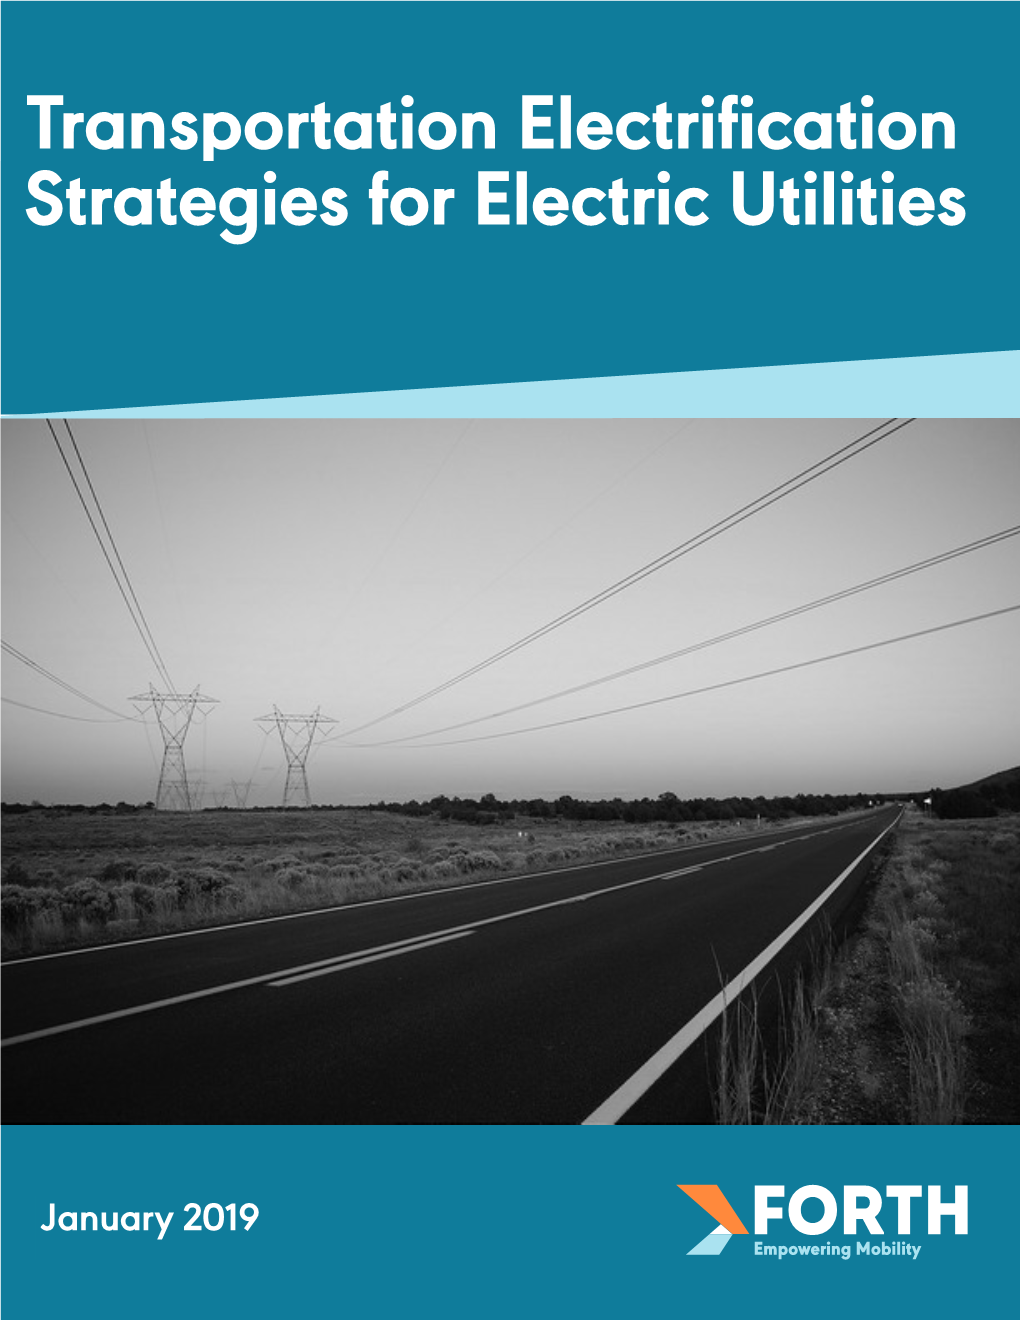 Transportation Electrification Strategies for Electric Utilities